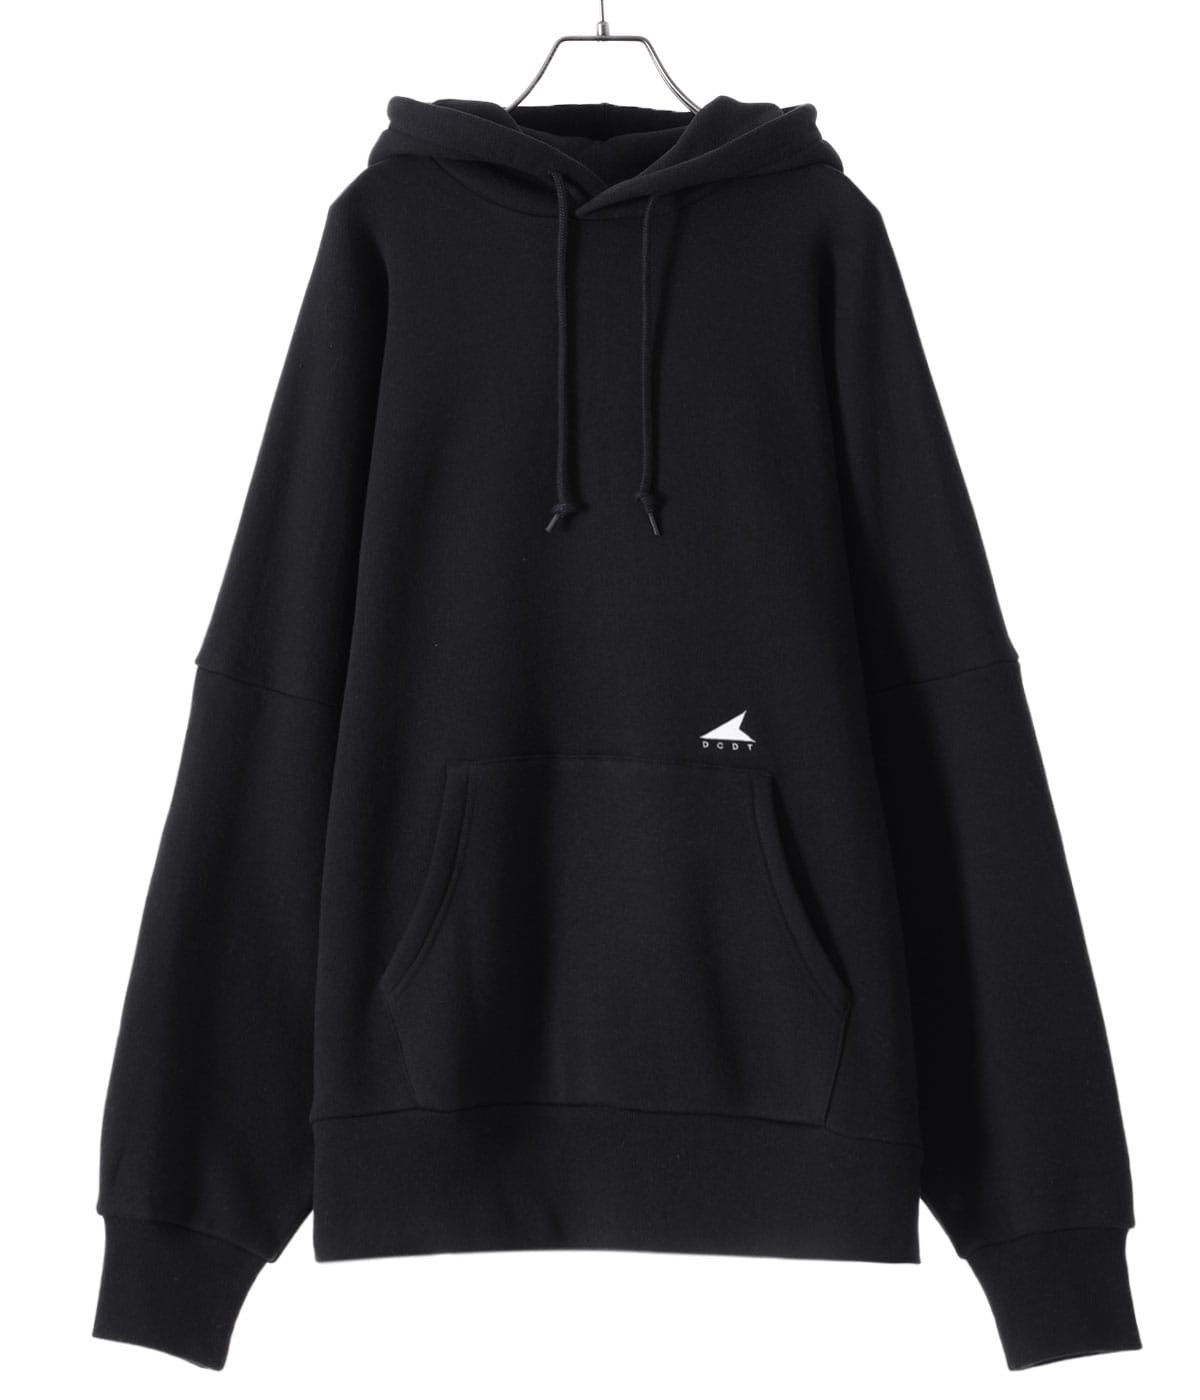 Ce jour HOODED SWEAT SHIRT | DESCENDANT(ディセンダント) / トップス 